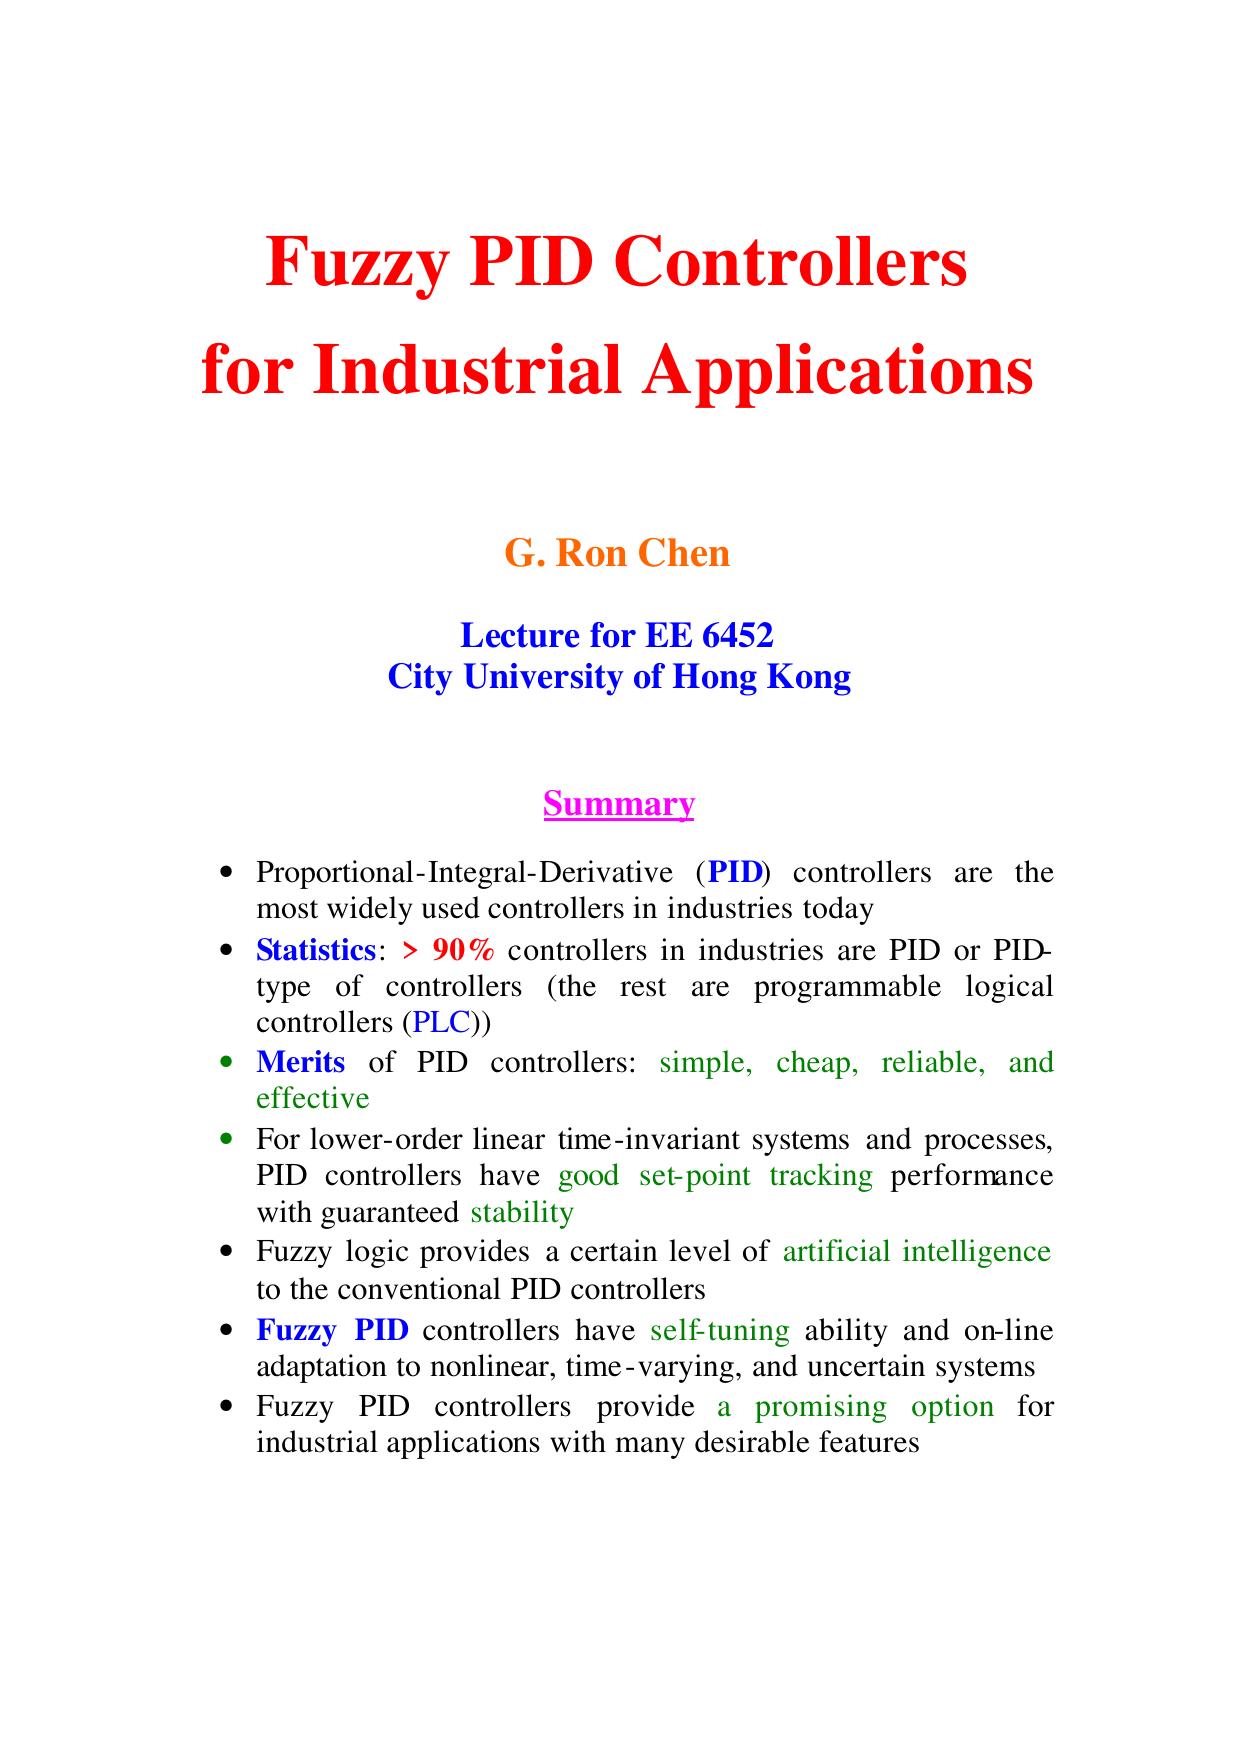 Fuzzy PID Controllers for Industrial Applications - Lecture